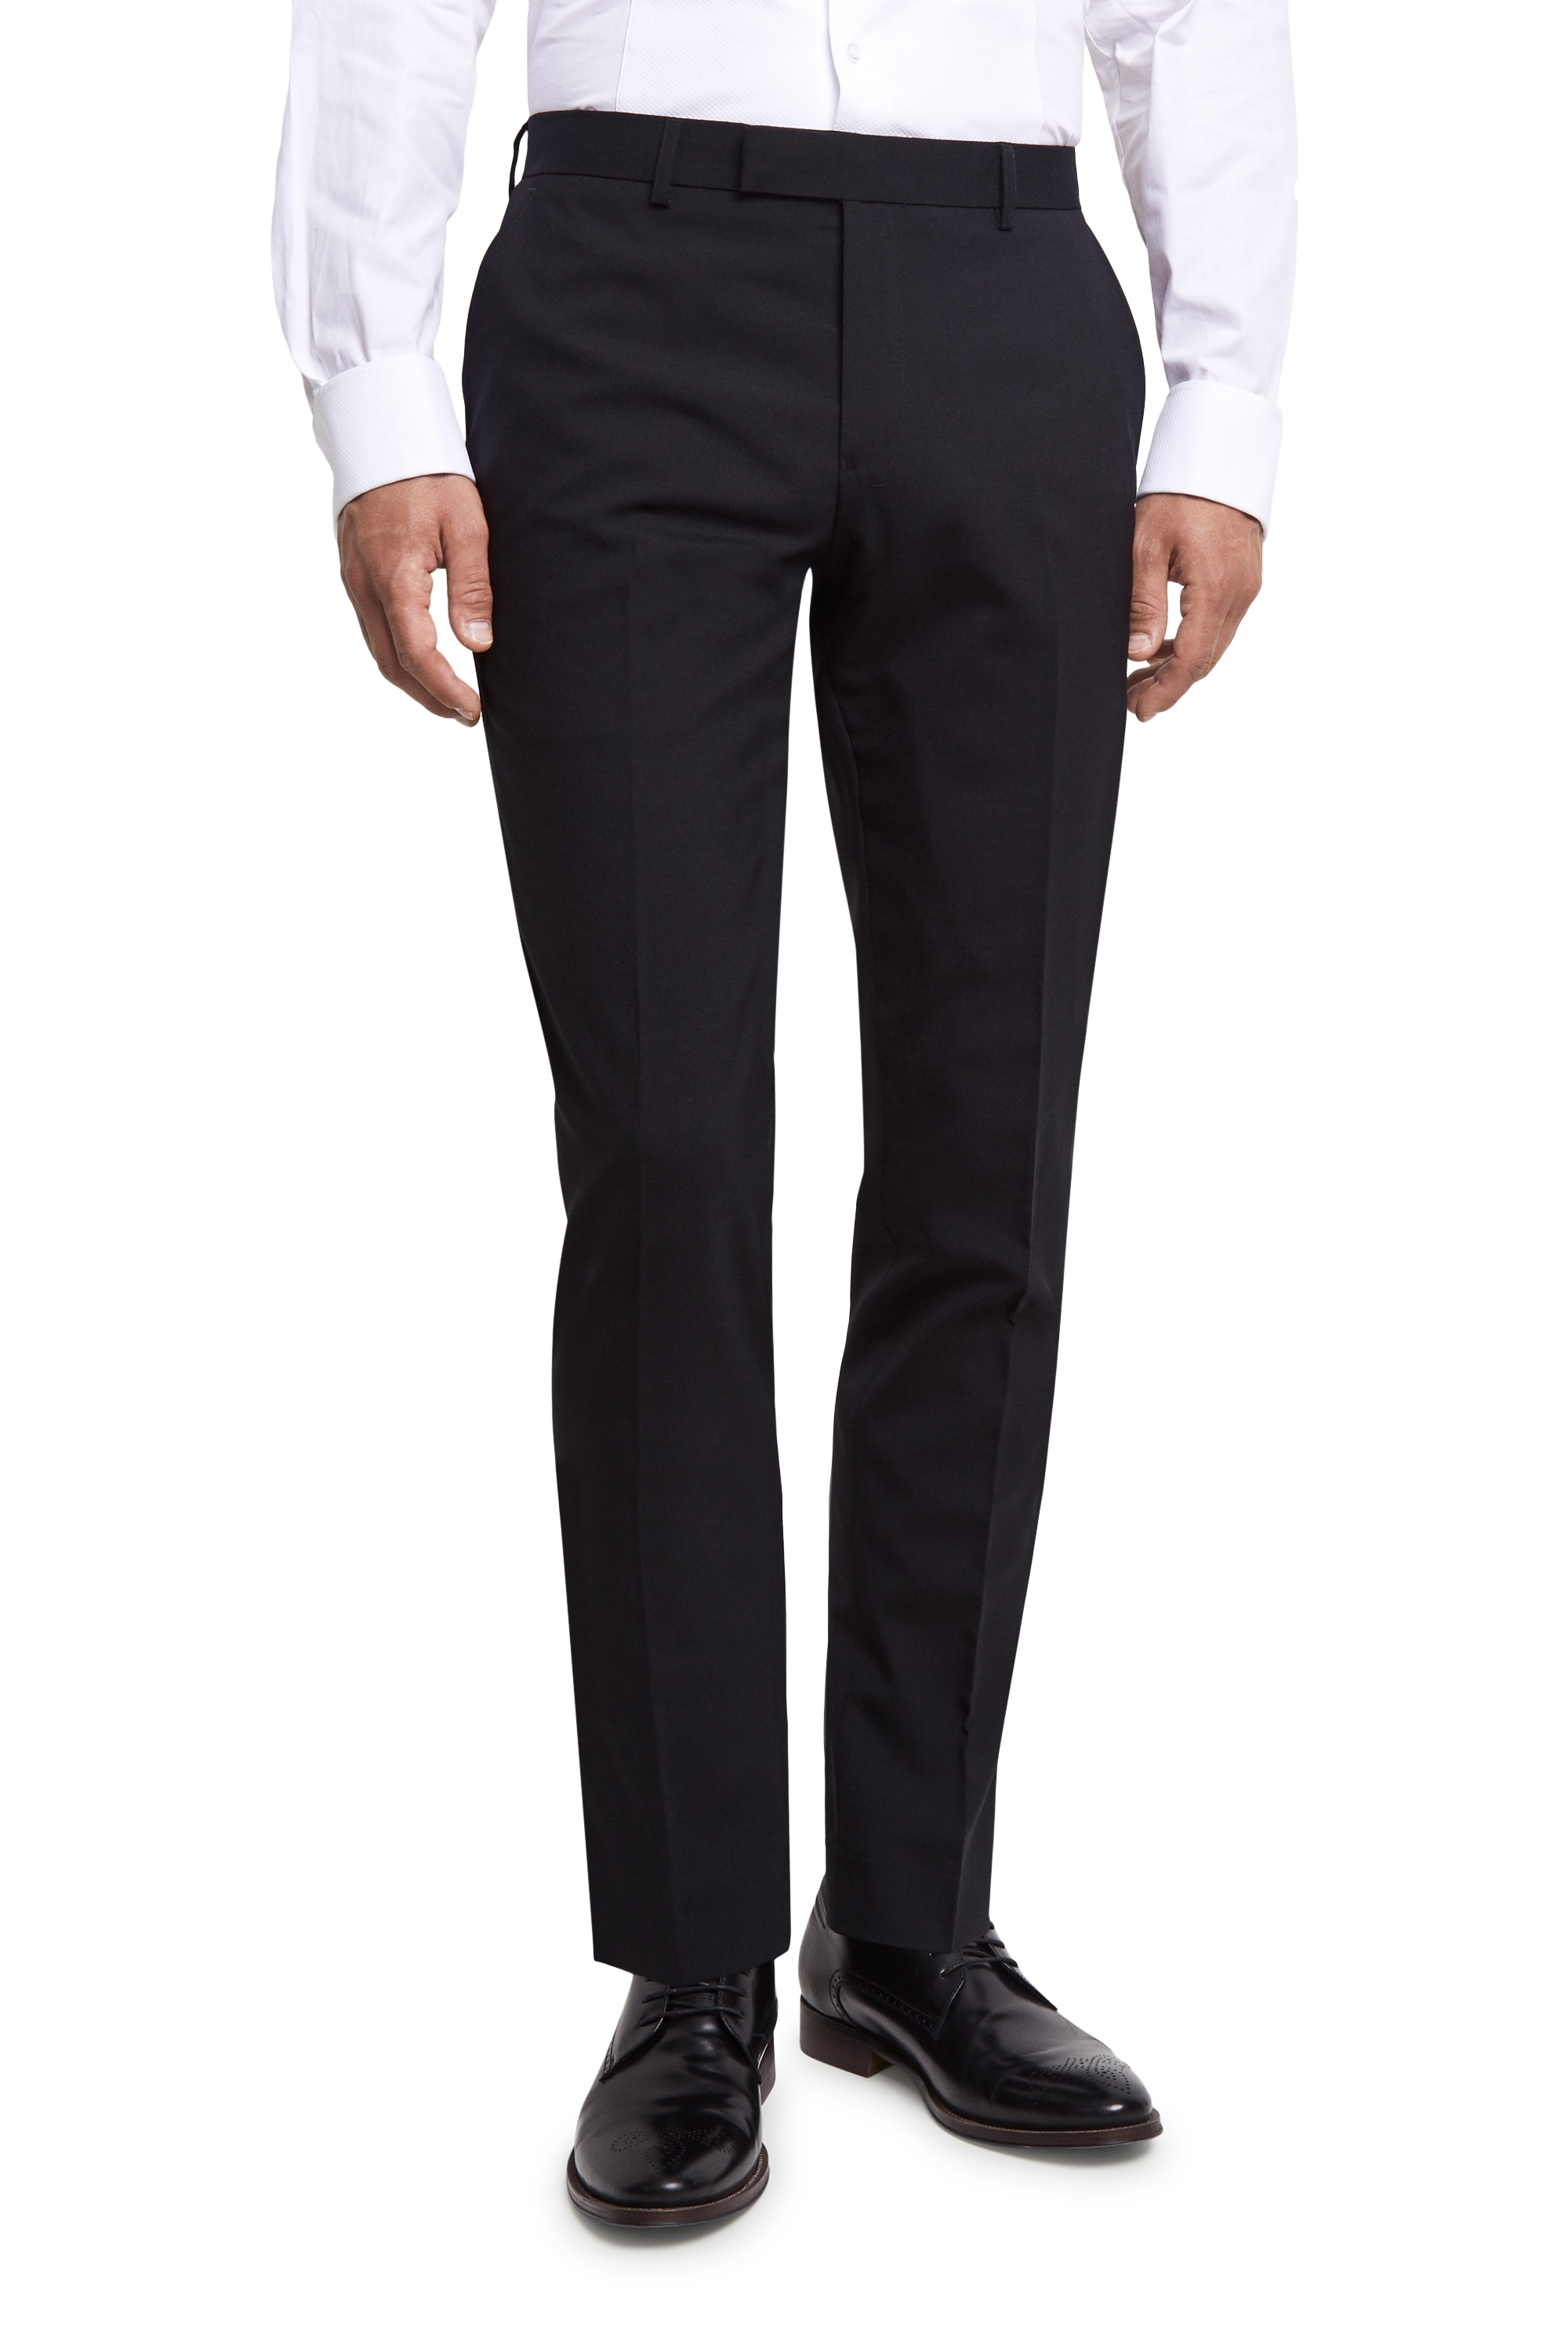 Tailored Fit Black Tuxedo Trousers | Buy Online at Moss